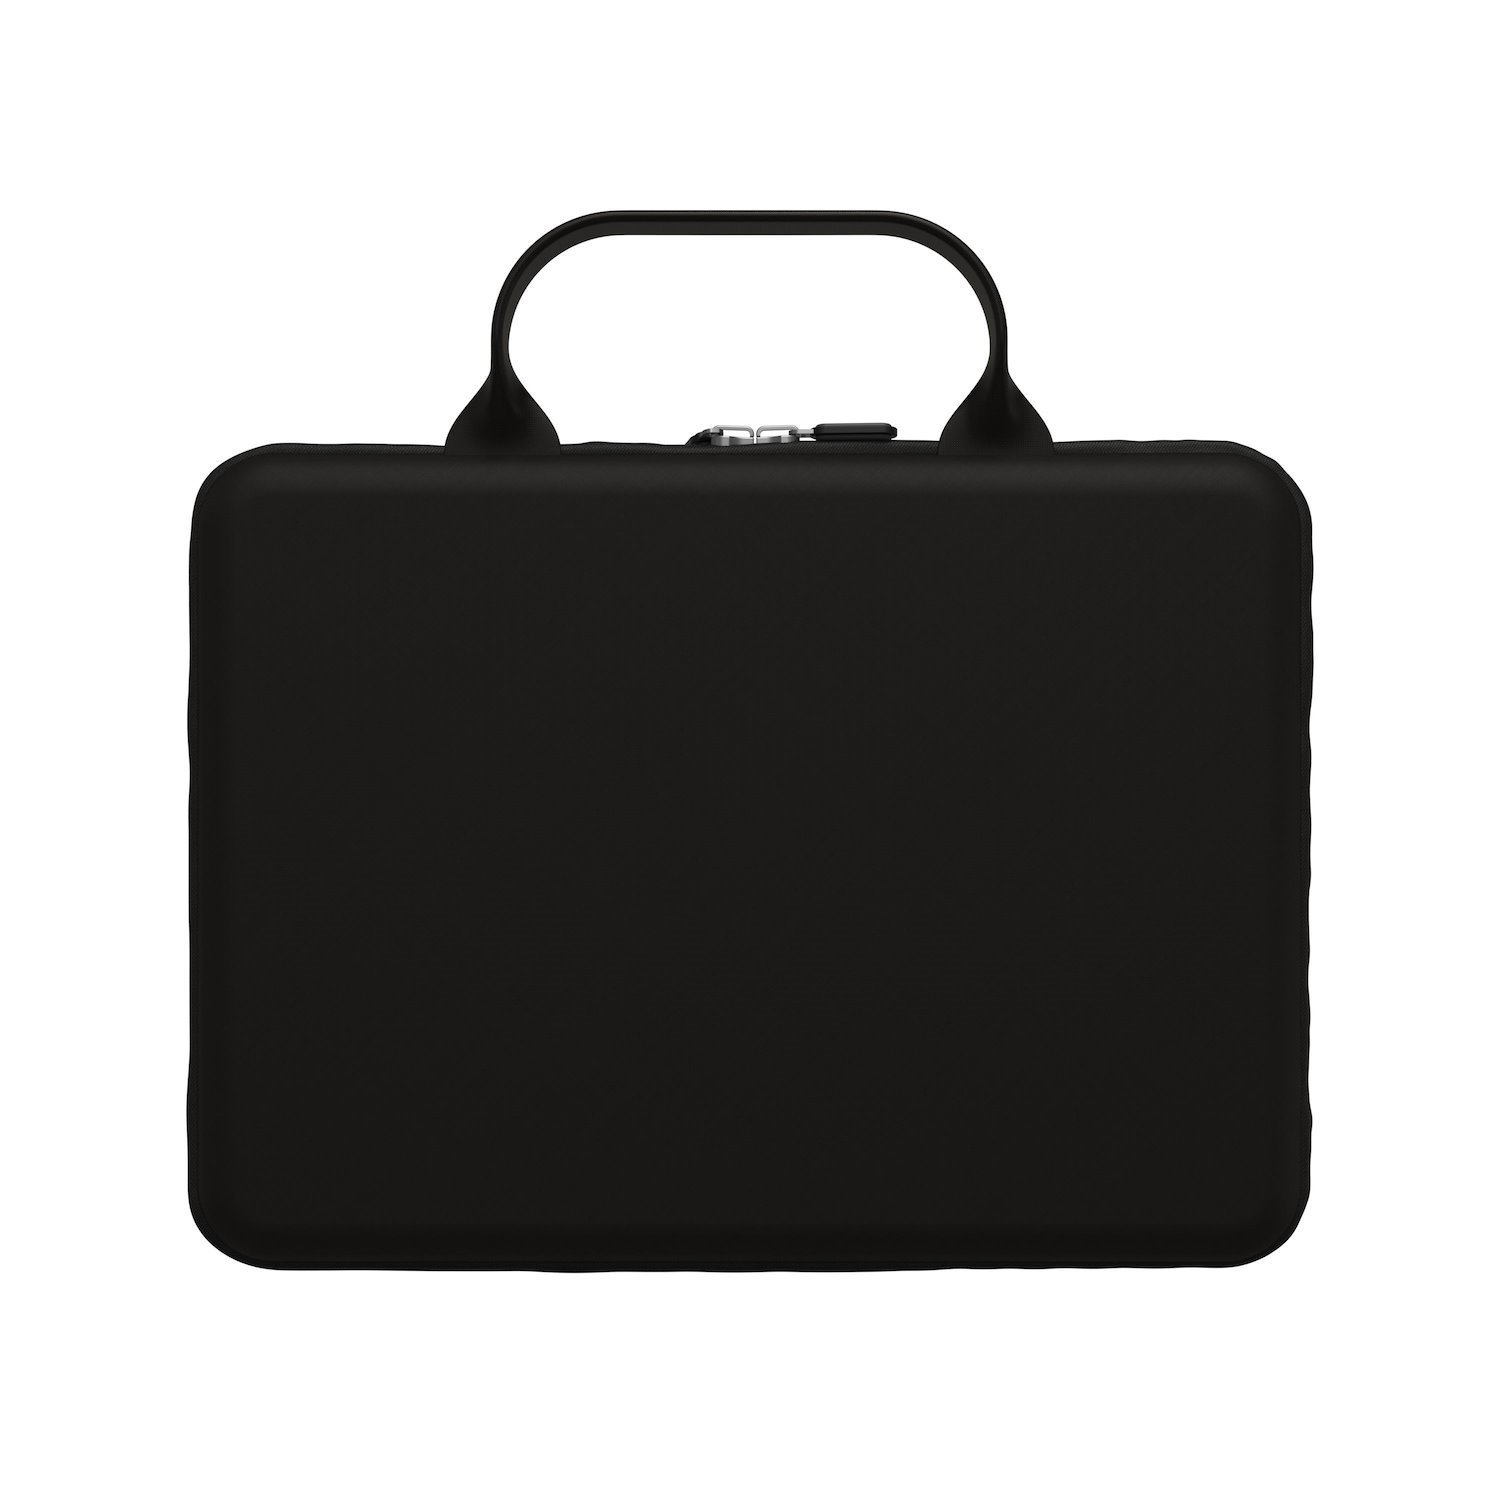 ZAGG Carrying Case for 33 cm (13") to 35.6 cm (14") Apple MacBook - Black